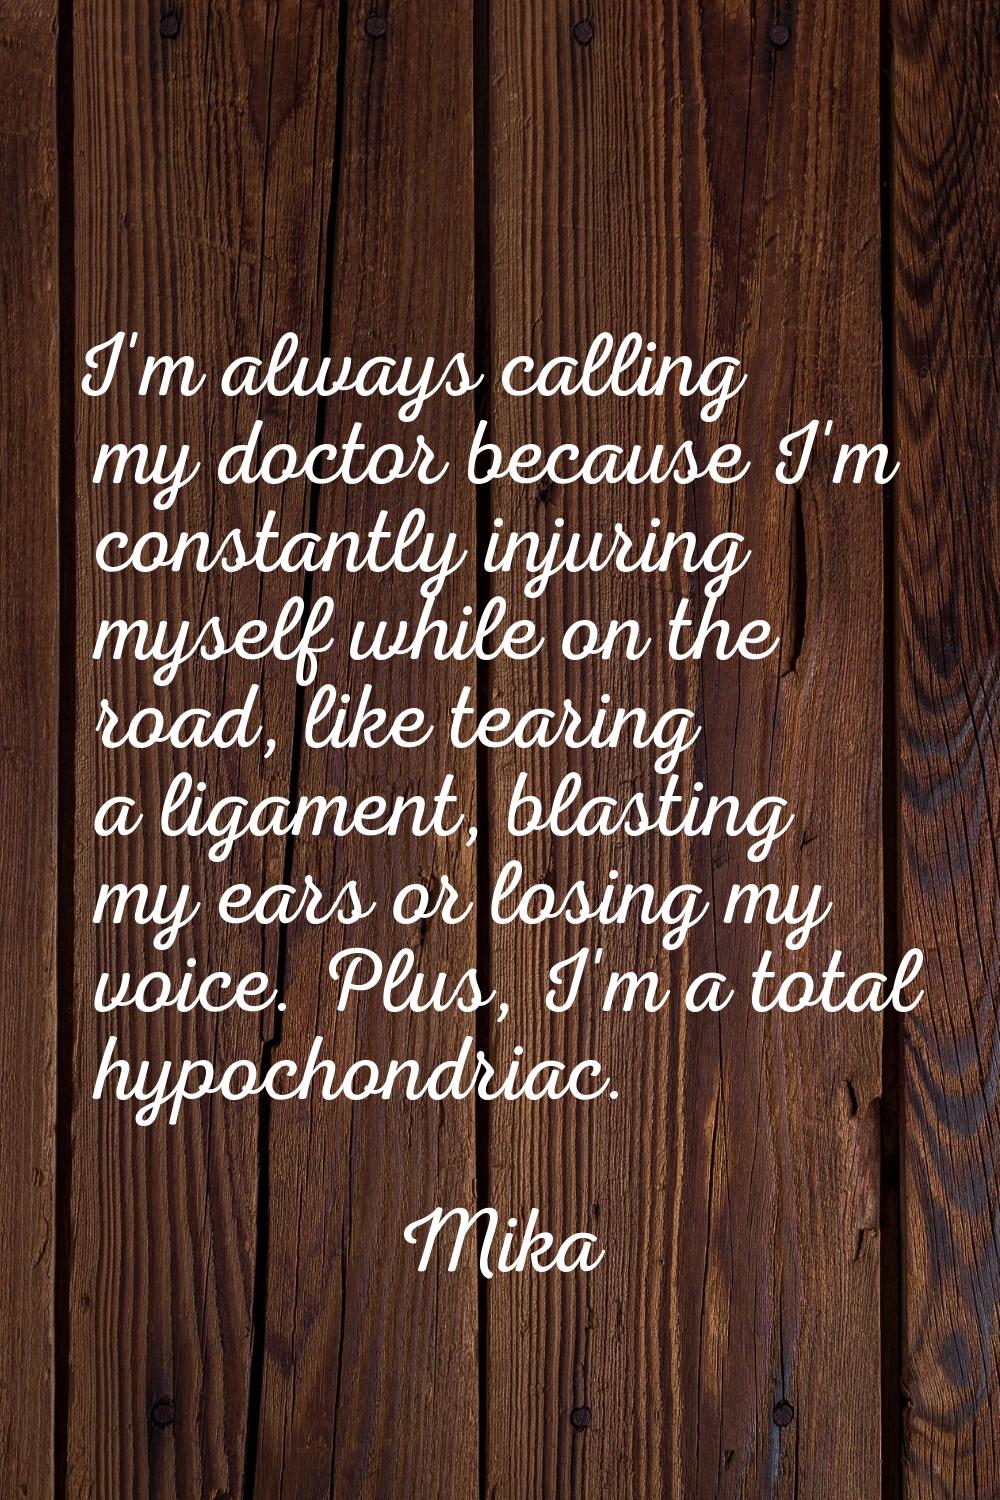 I'm always calling my doctor because I'm constantly injuring myself while on the road, like tearing